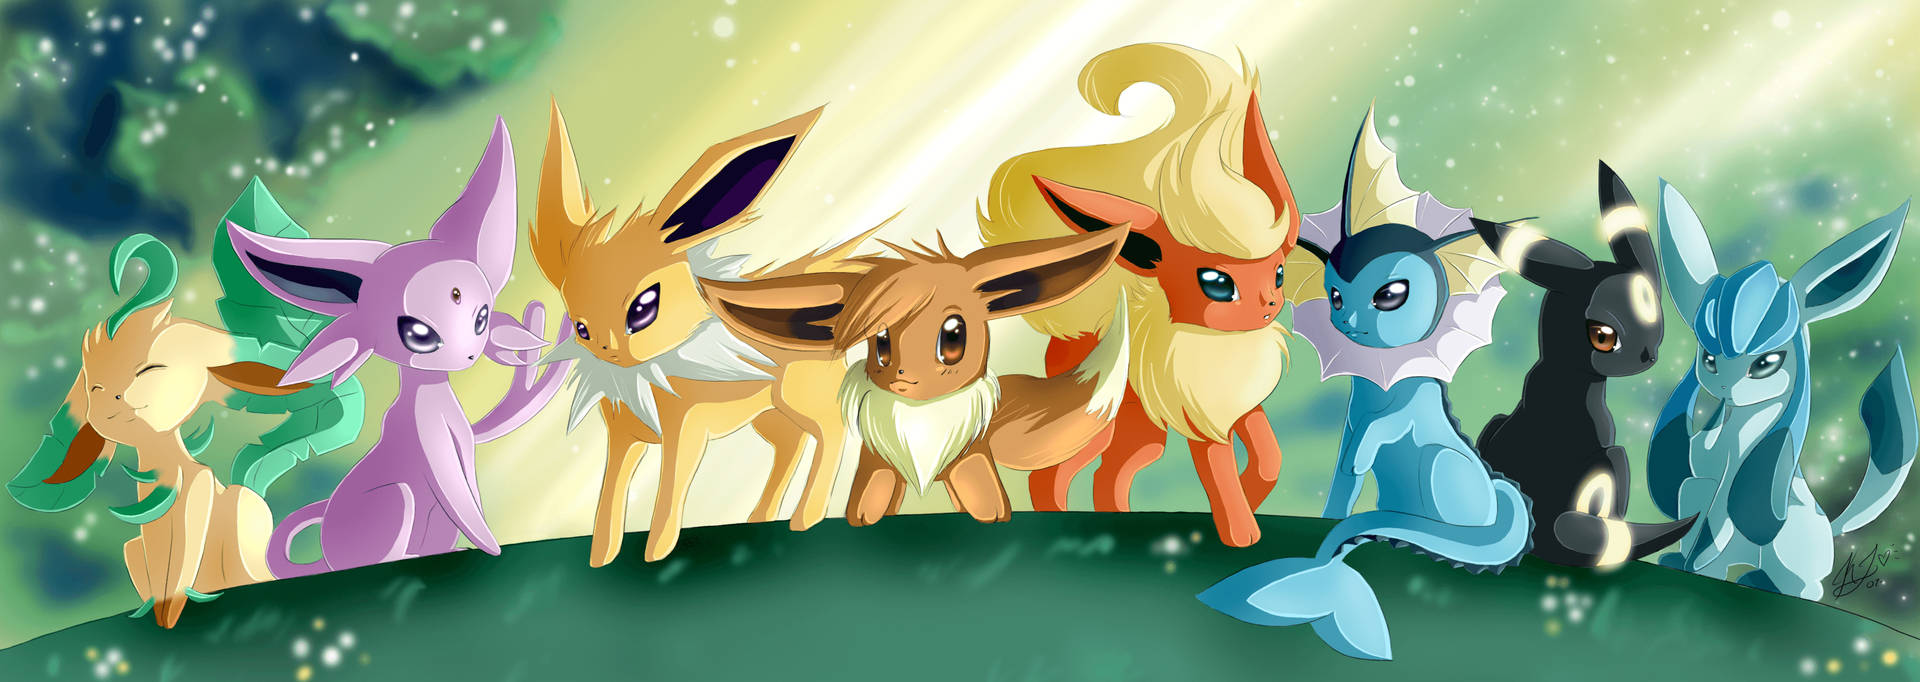 Espeon And Eevee Forms